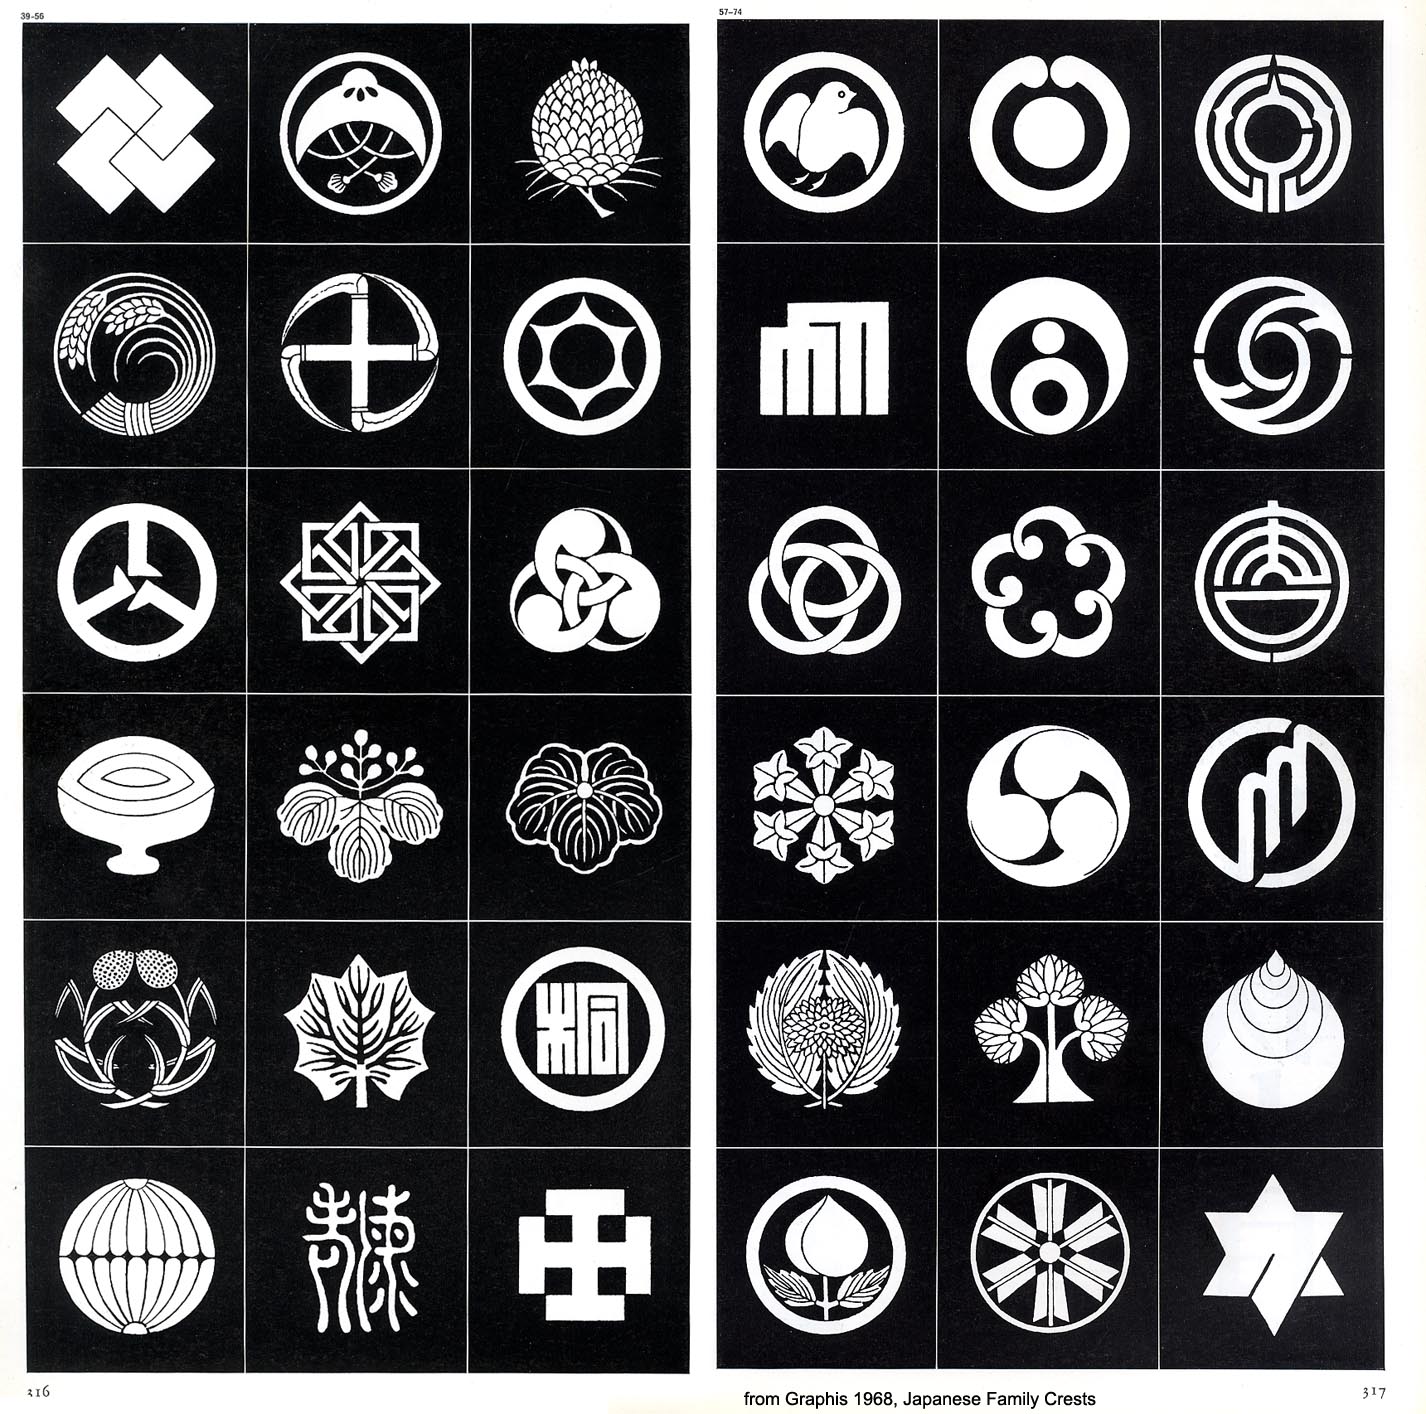 I want Japanese symbol buttons